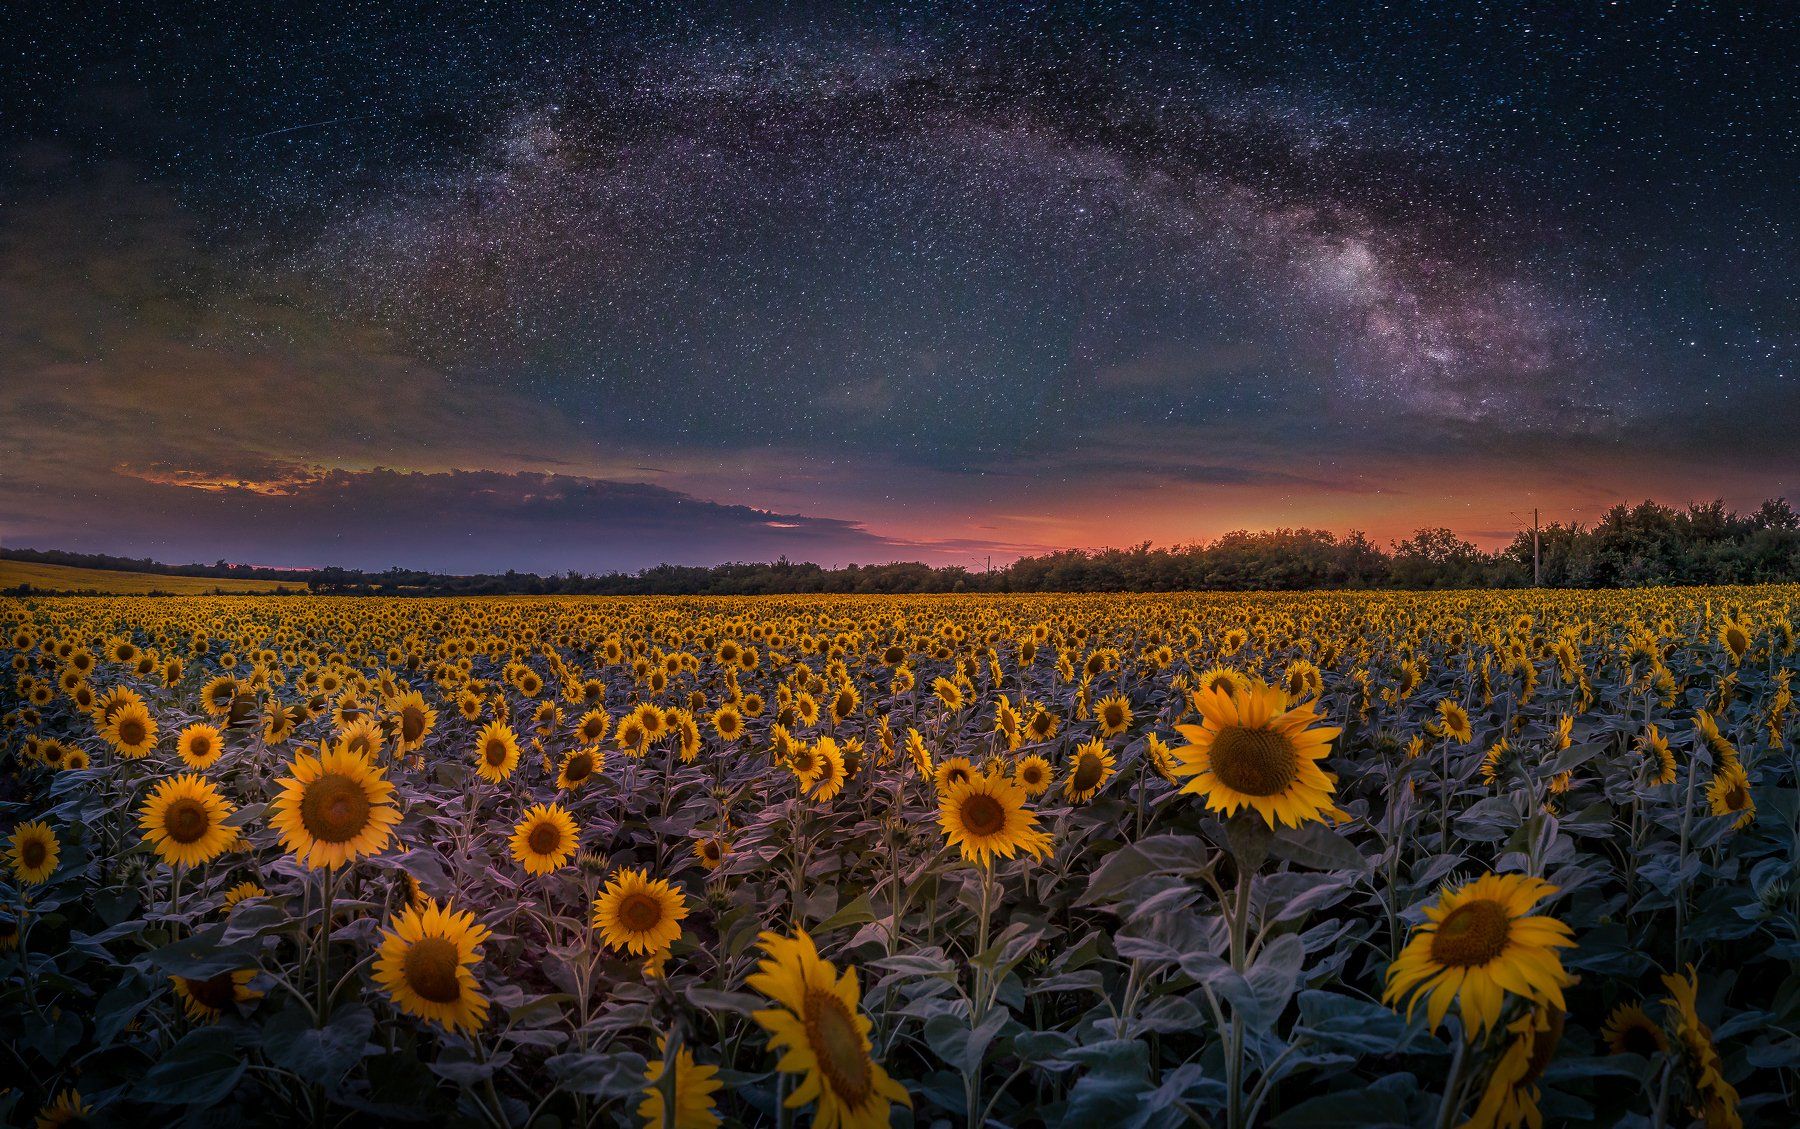 astrophotography, astroscape, astronomy, galaxy, milky way, nightscape, night, sky, stars, long exposure, nature, bulgaria, space, panorama, sunflowers, summer, Кристиян Младенов